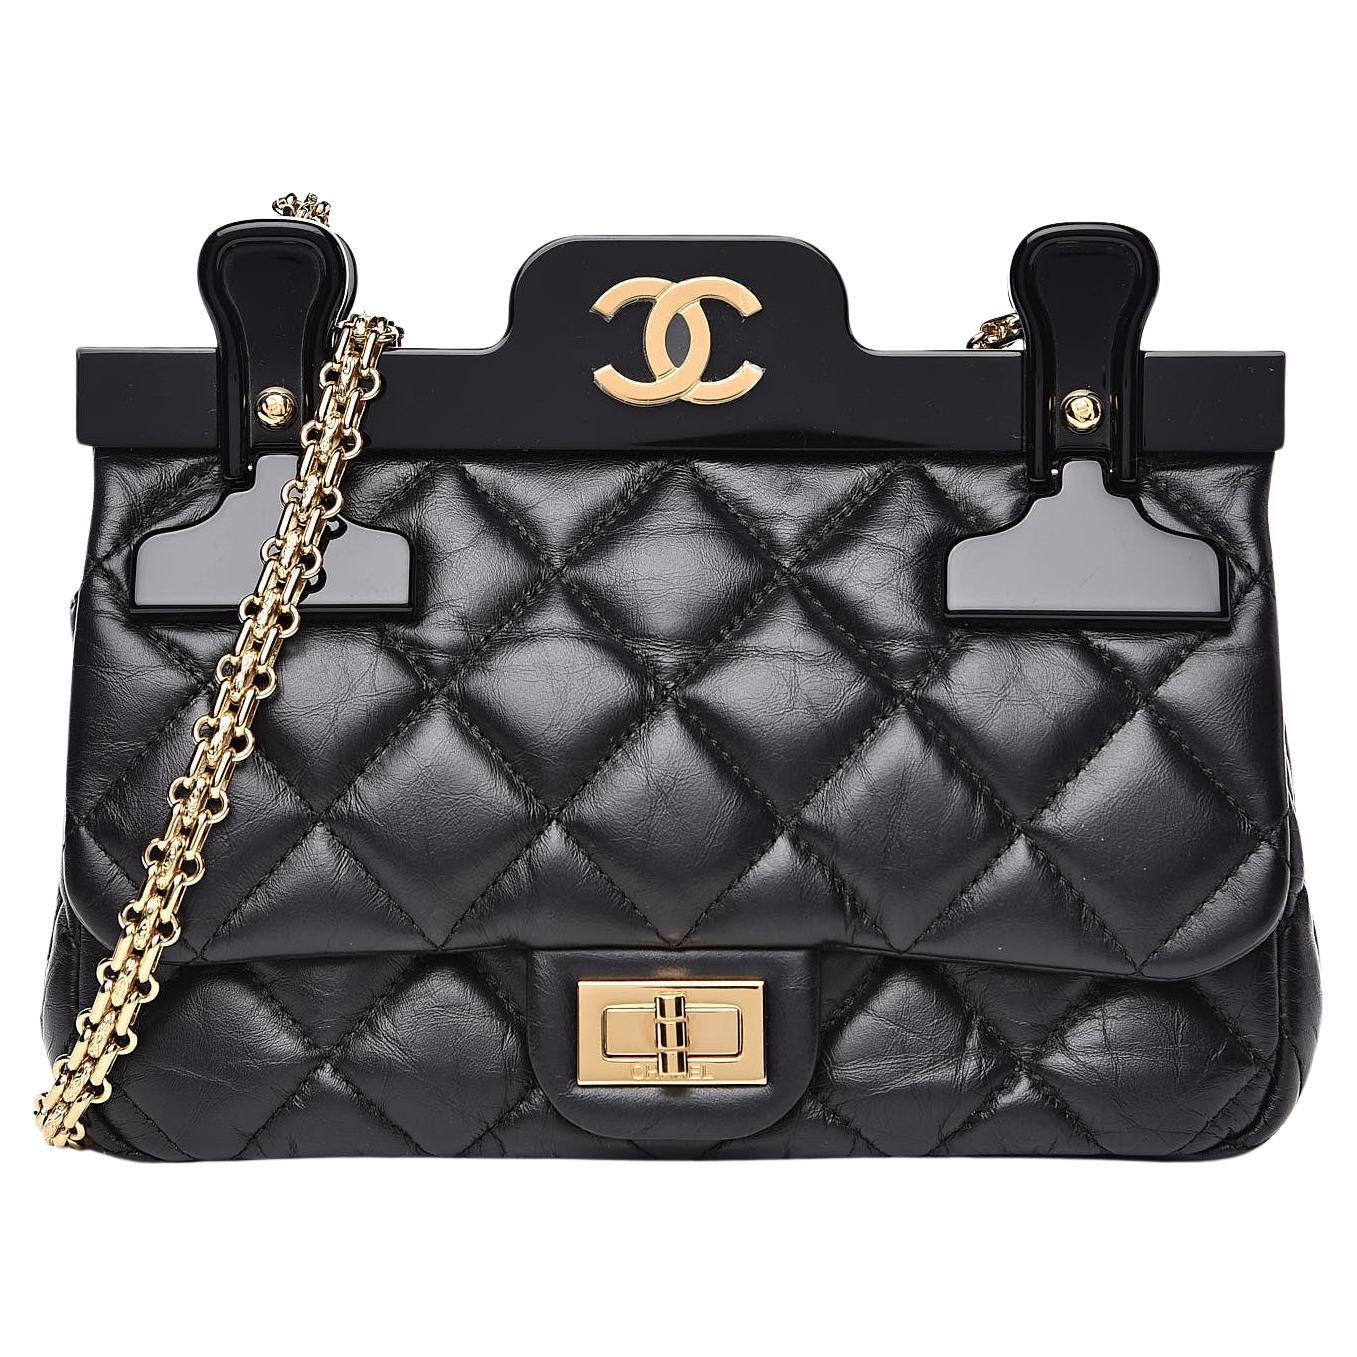 Chanel 2016 Runway Rare Small Hanger Limited Edition Reissue Classic Flap Bag For Sale